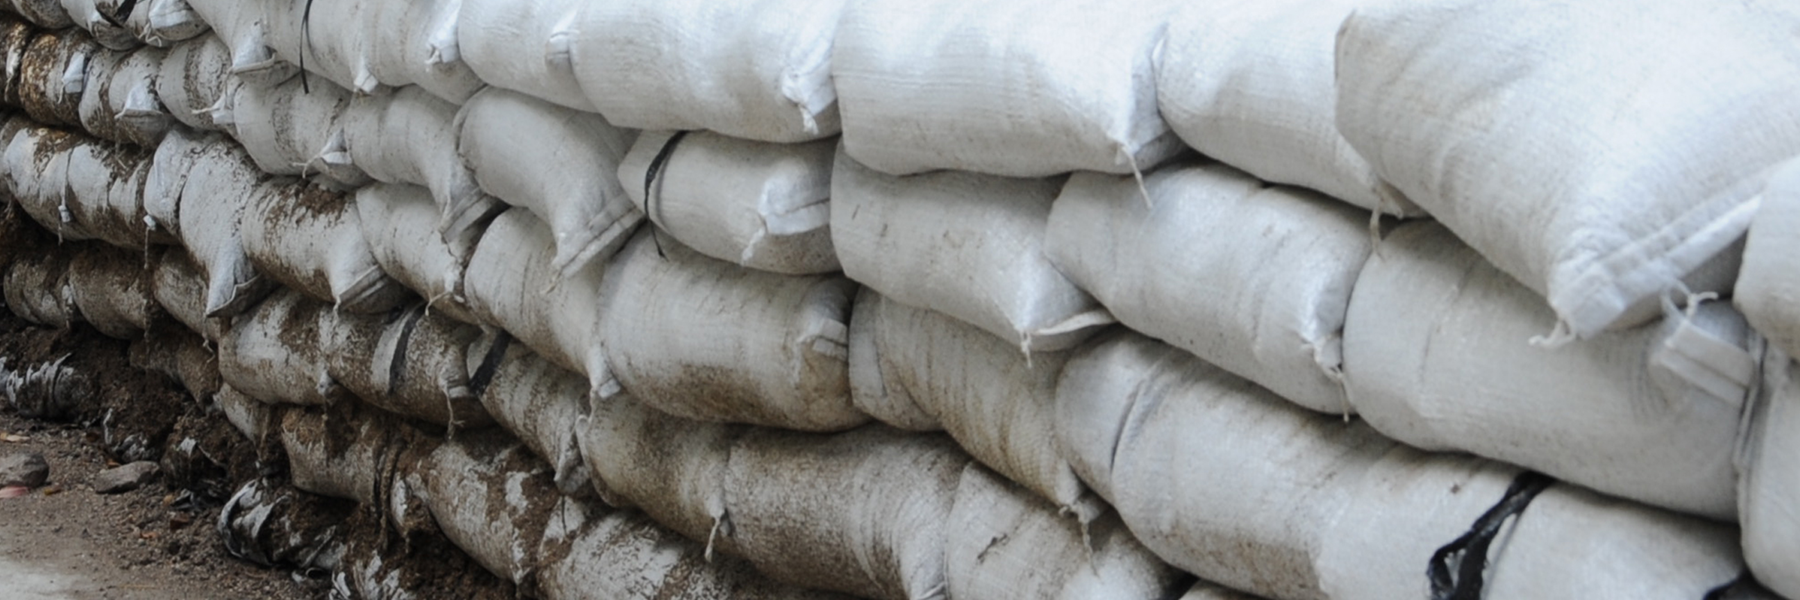 Photo of sandbags.Flood damages can be mitigated by early warning and protective measures.